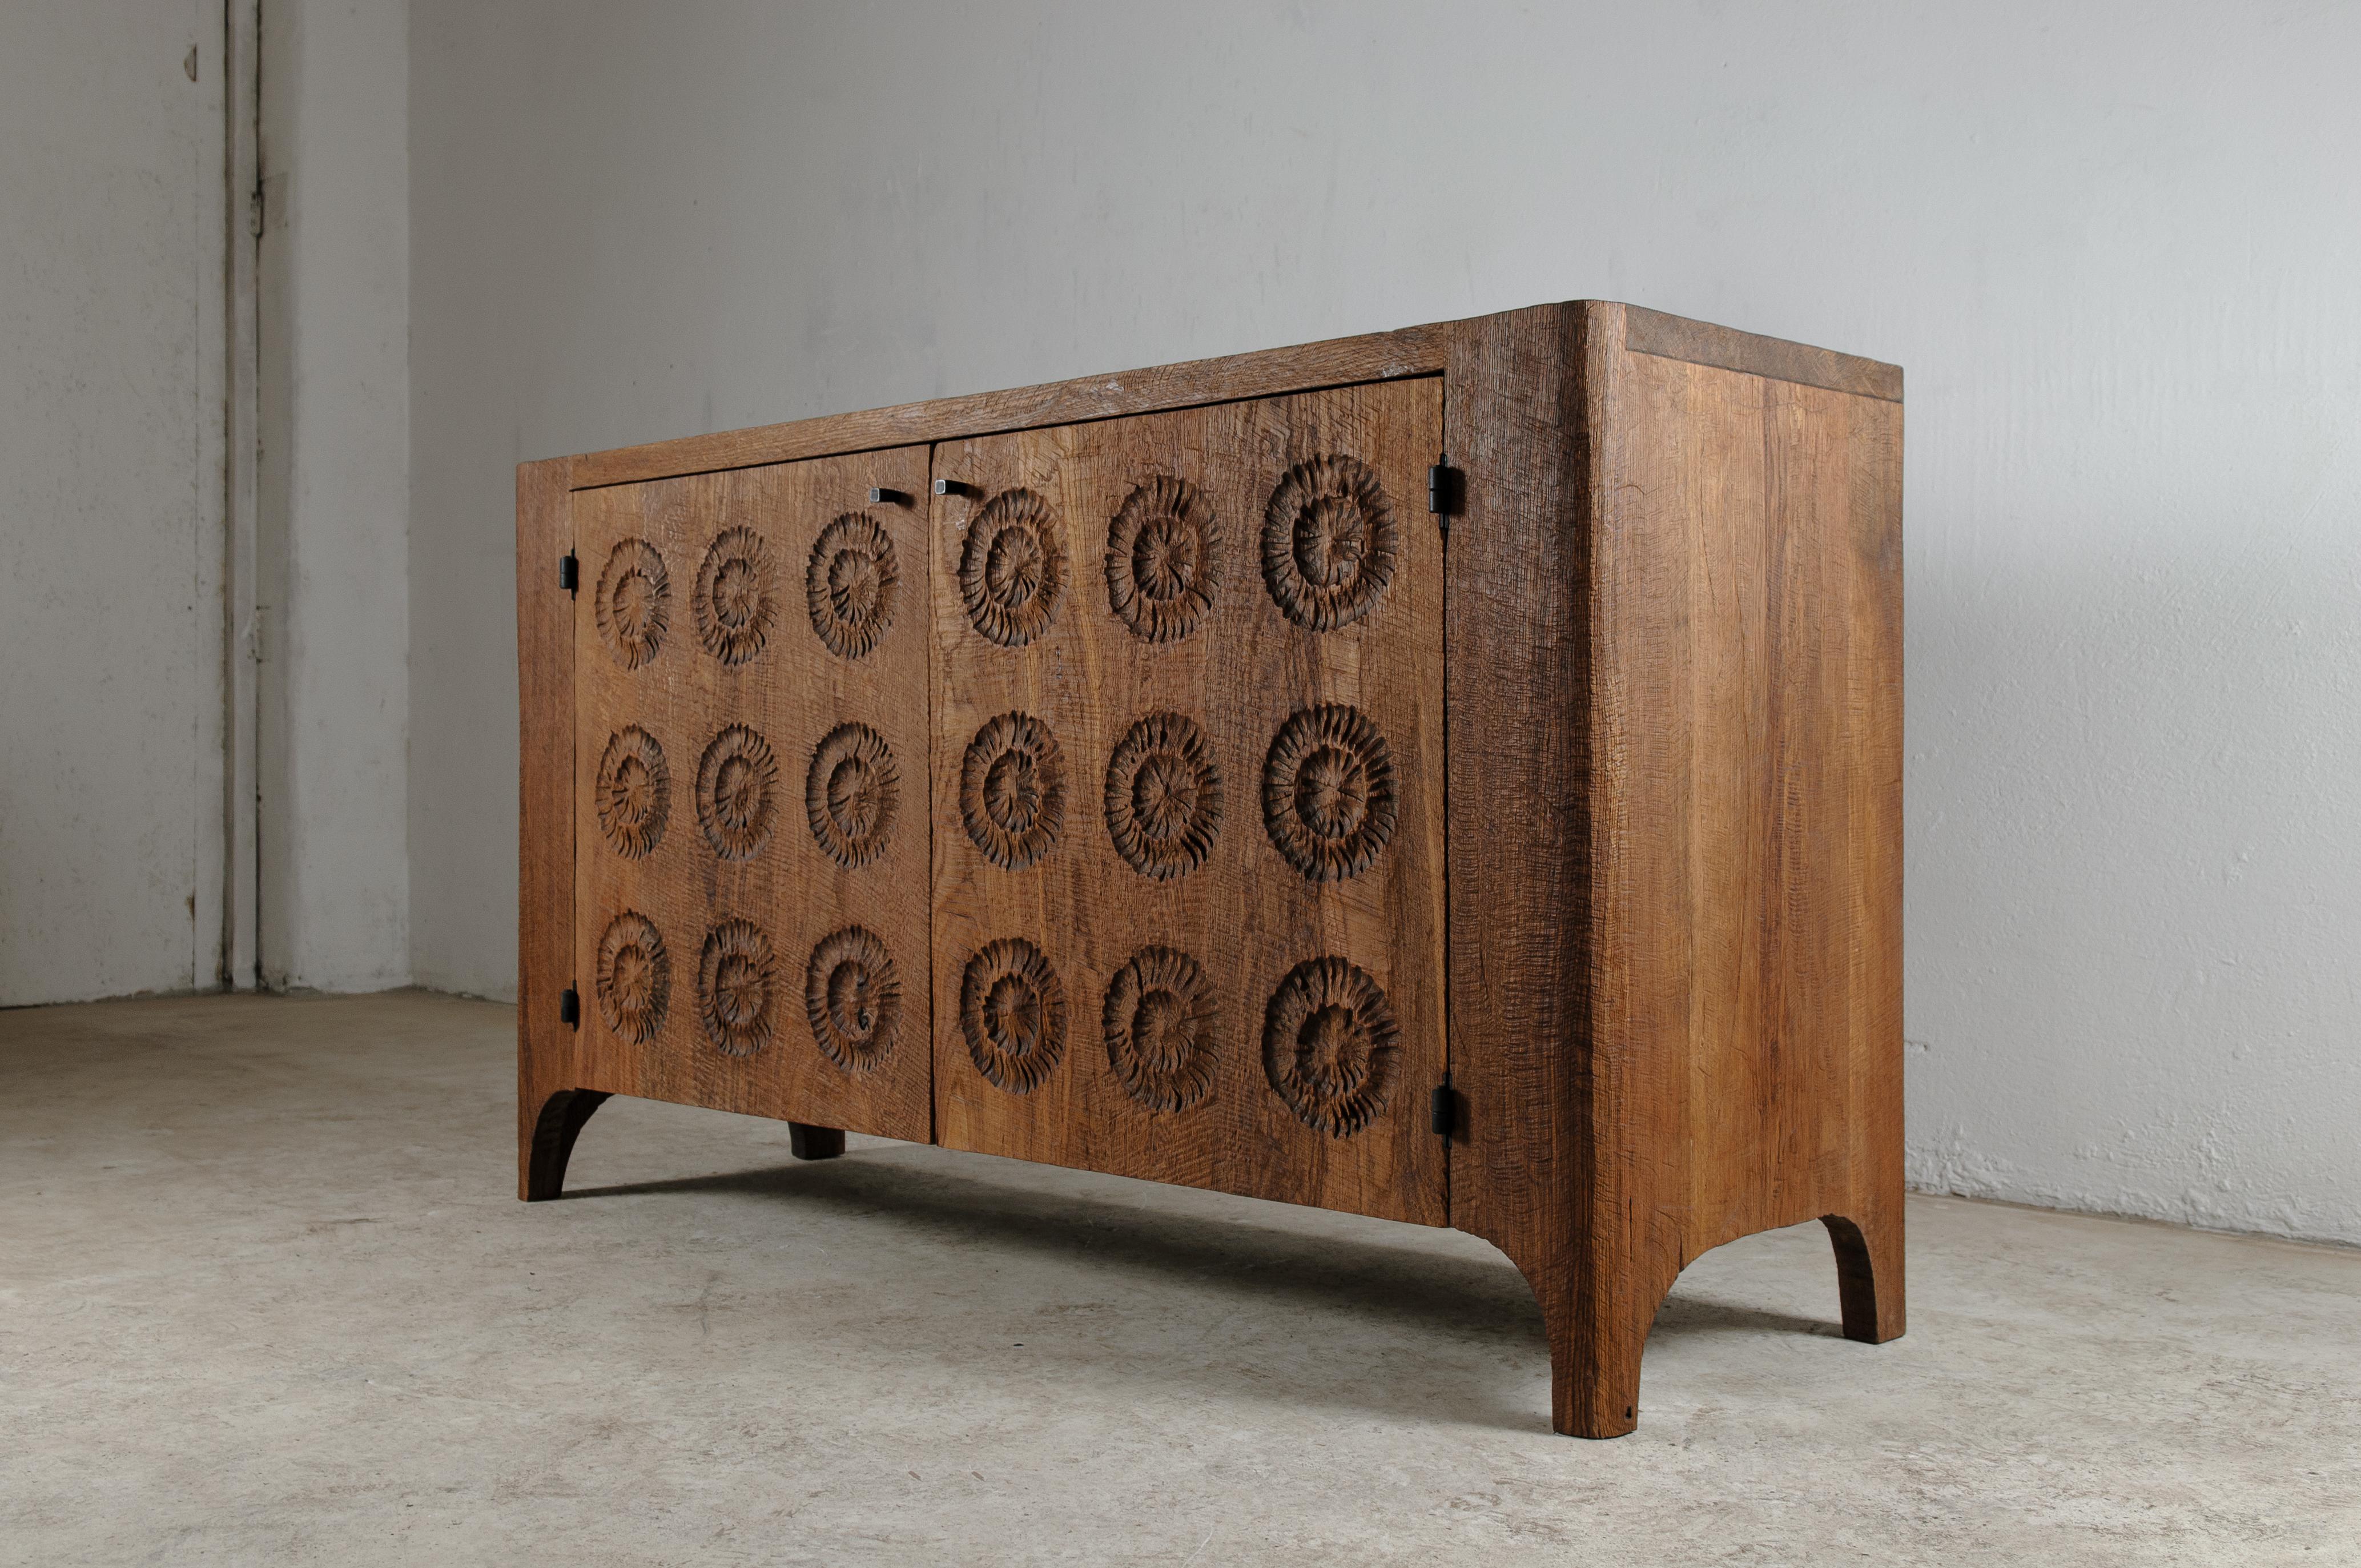 Contemporary sculpted sideboard in solid oak and linseed oil.

Dimensions: 
H. 85 x W. 160. x D. 45 cm

Unique piece made to order.

Founded by artist Denis Milovanov, SÓHA design studio conceives and produces furniture design and decorative